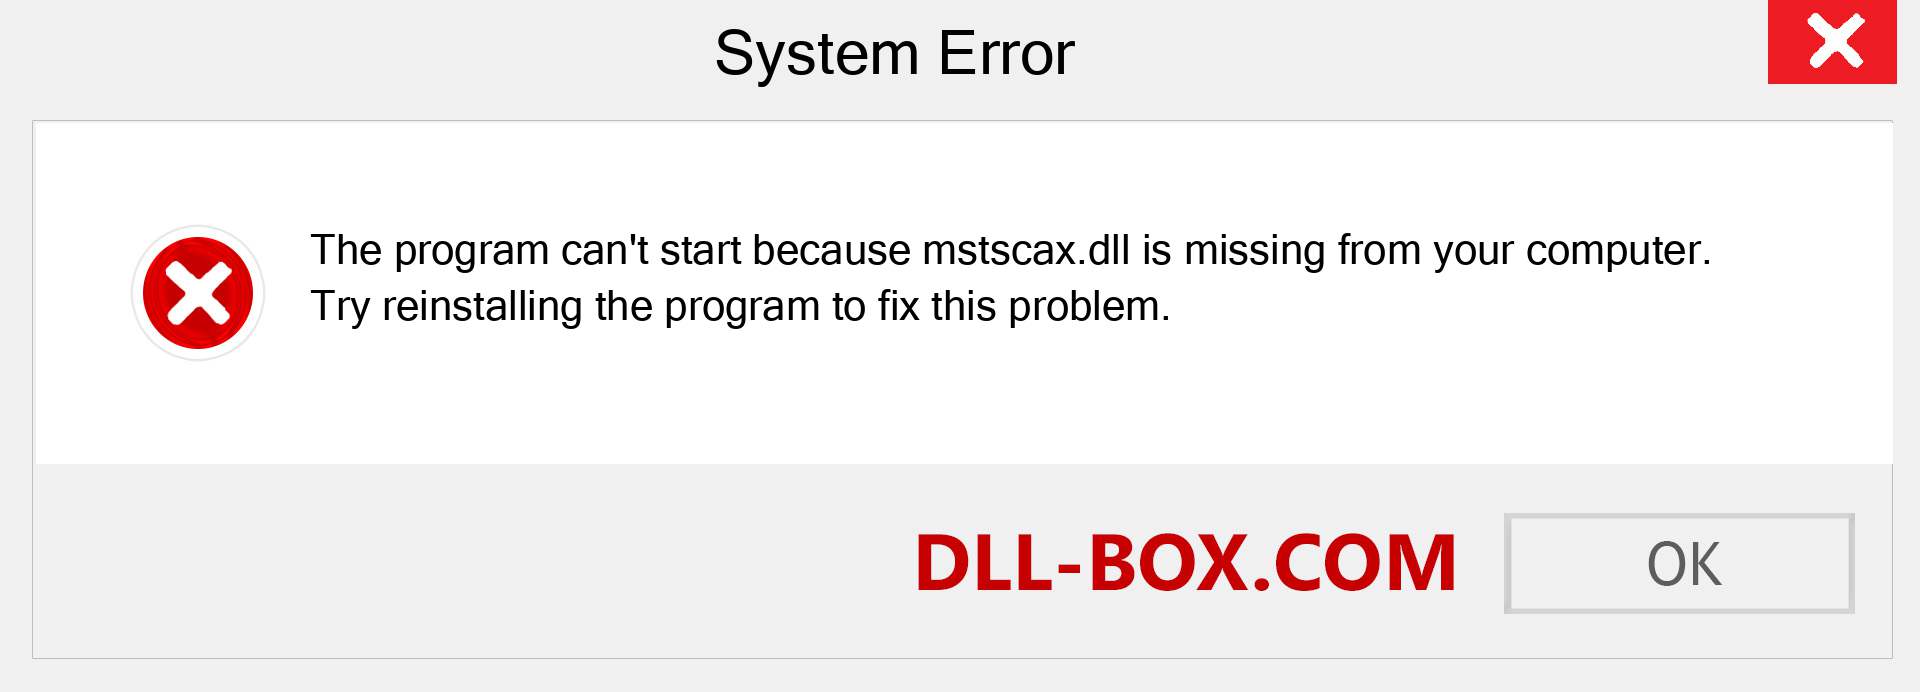  mstscax.dll file is missing?. Download for Windows 7, 8, 10 - Fix  mstscax dll Missing Error on Windows, photos, images